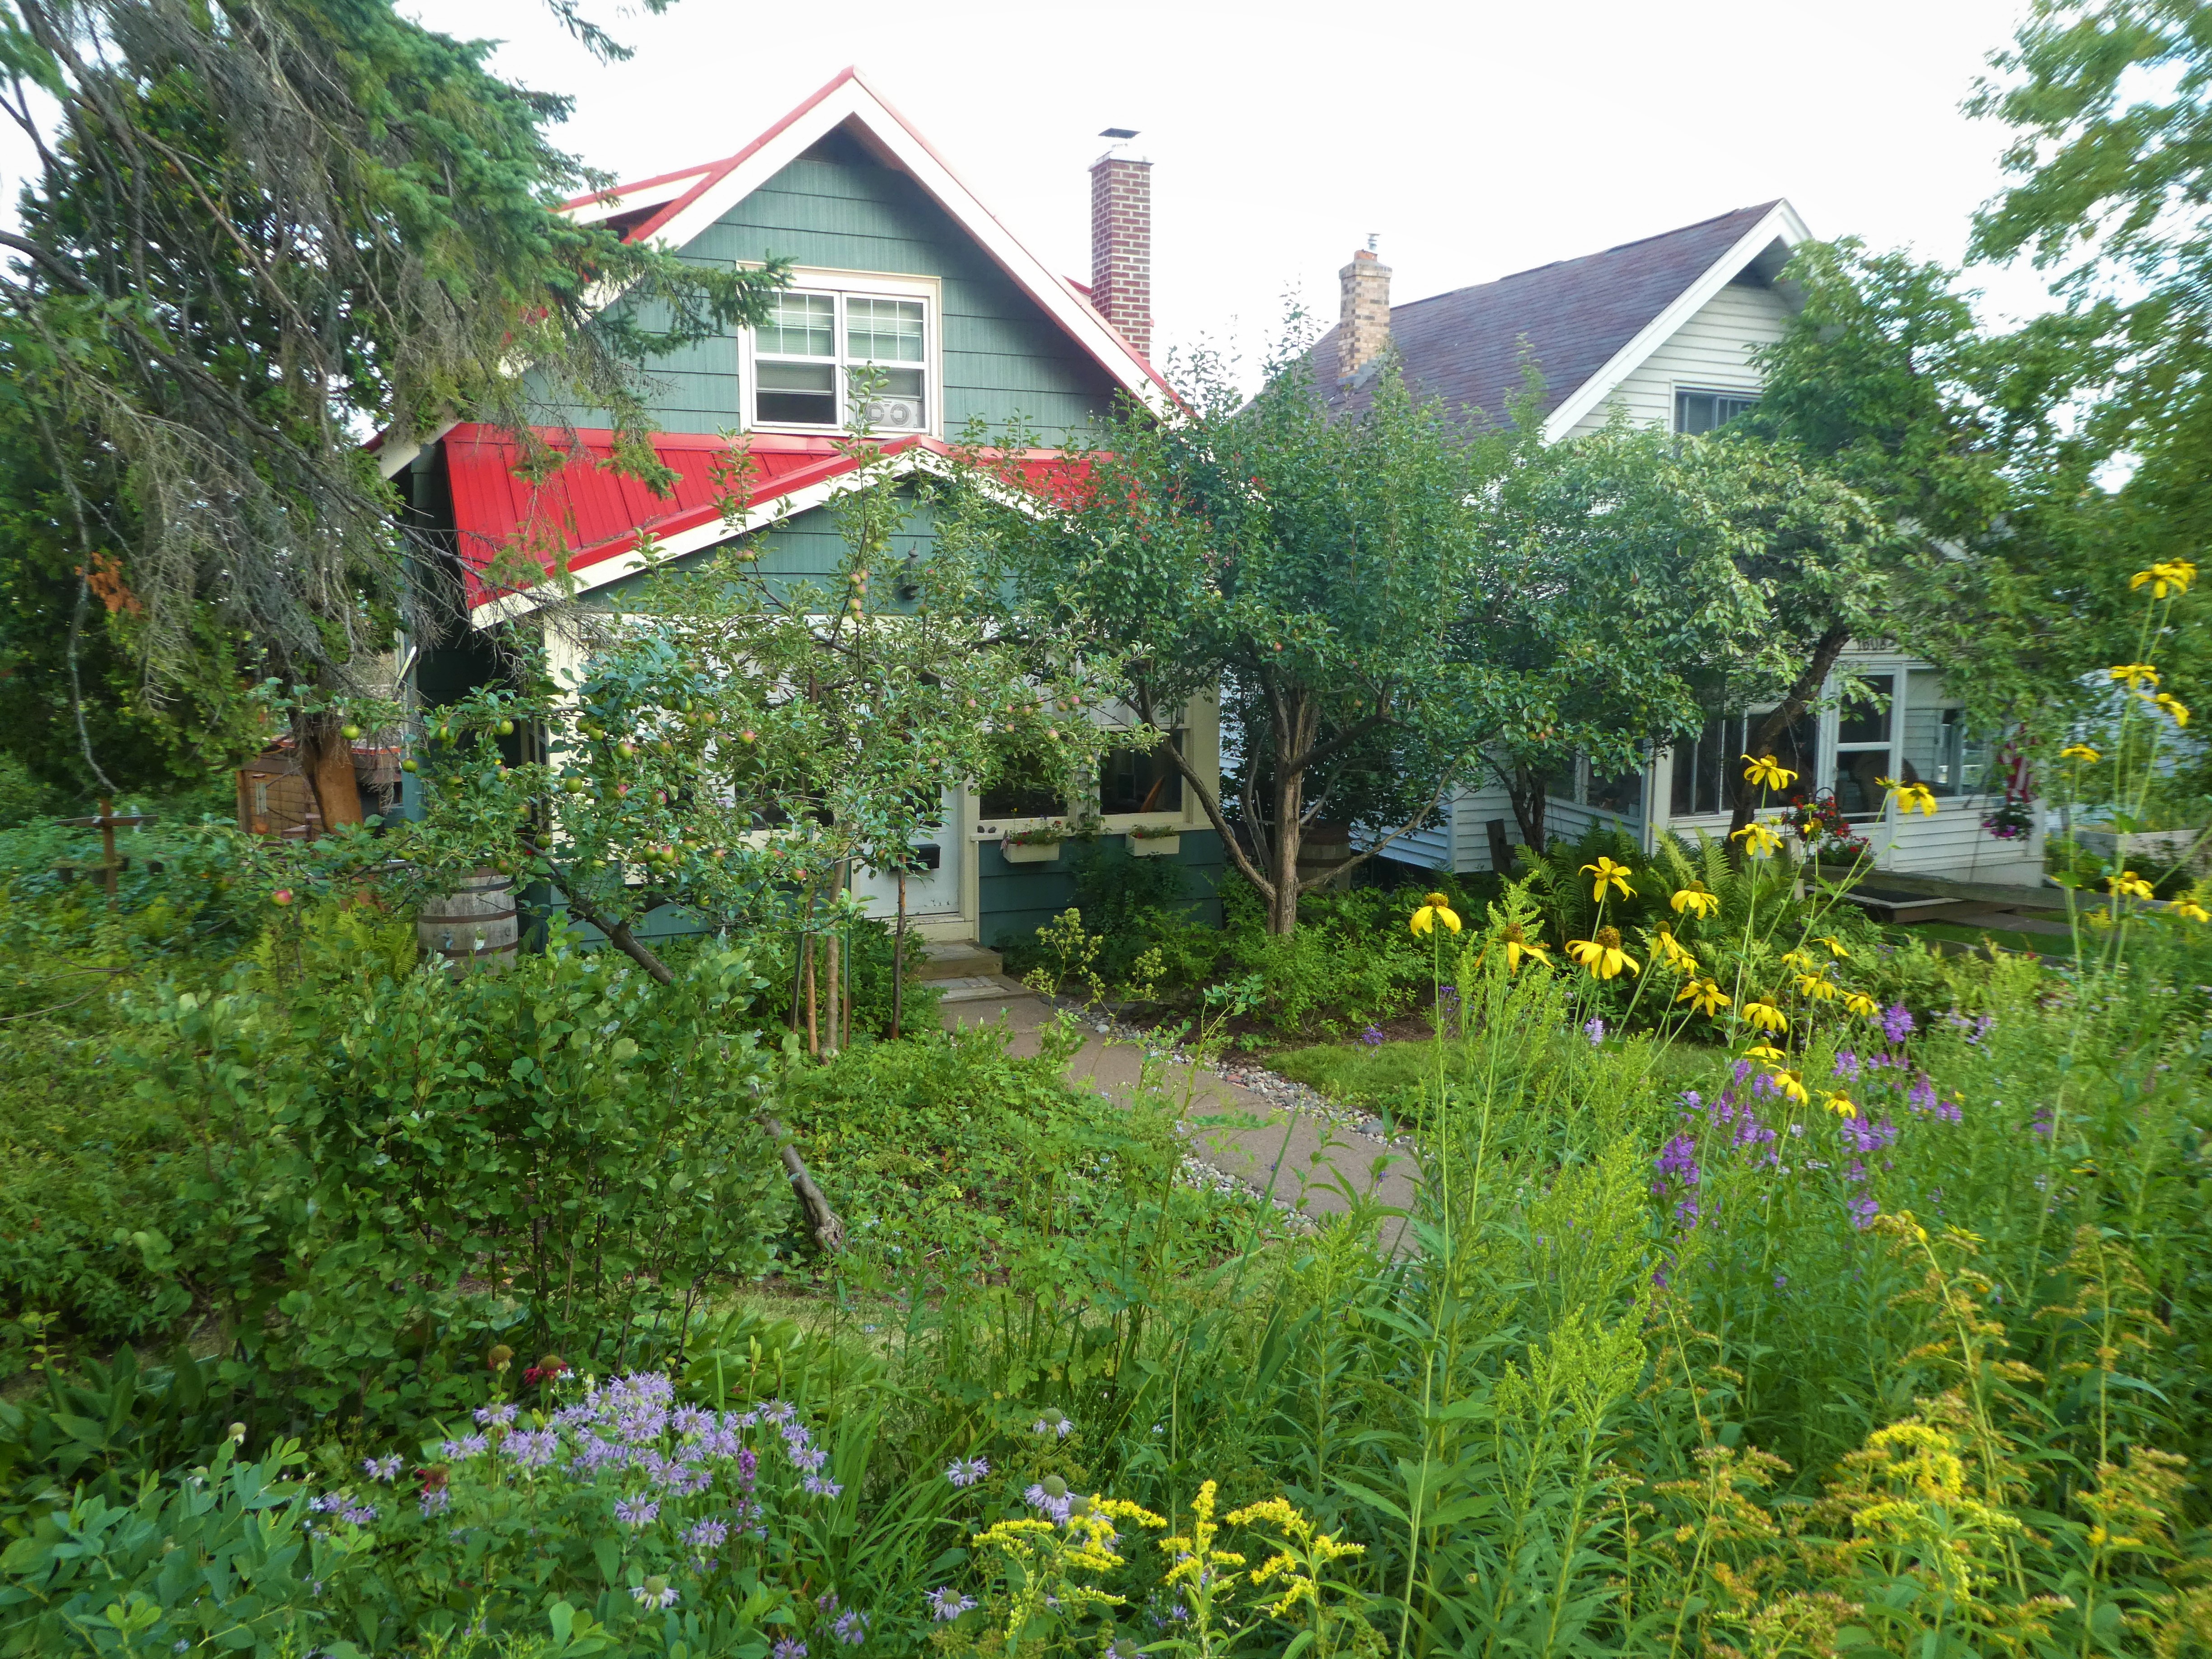 A green house is nearly obscured by a lush, green yard bursting with colorful flowers in the foreground, and fruit trees nearer to the house.